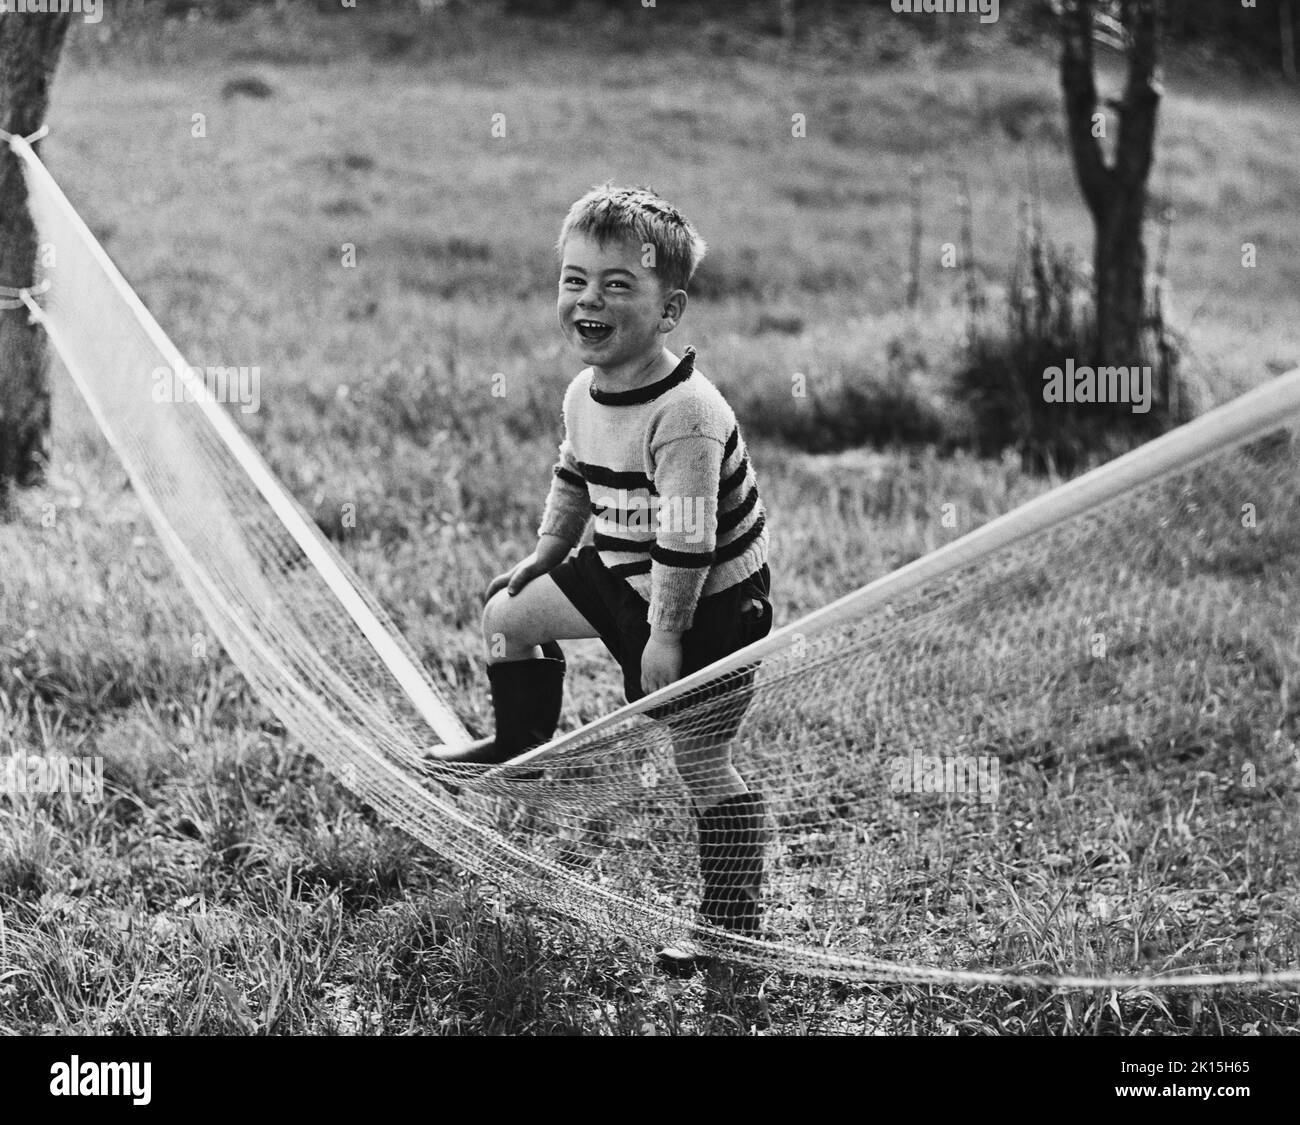 The photograph is captioned: 'What did you expect, Forest Hills?'. A laughing young boy tramples a tennis net. Stock Photo